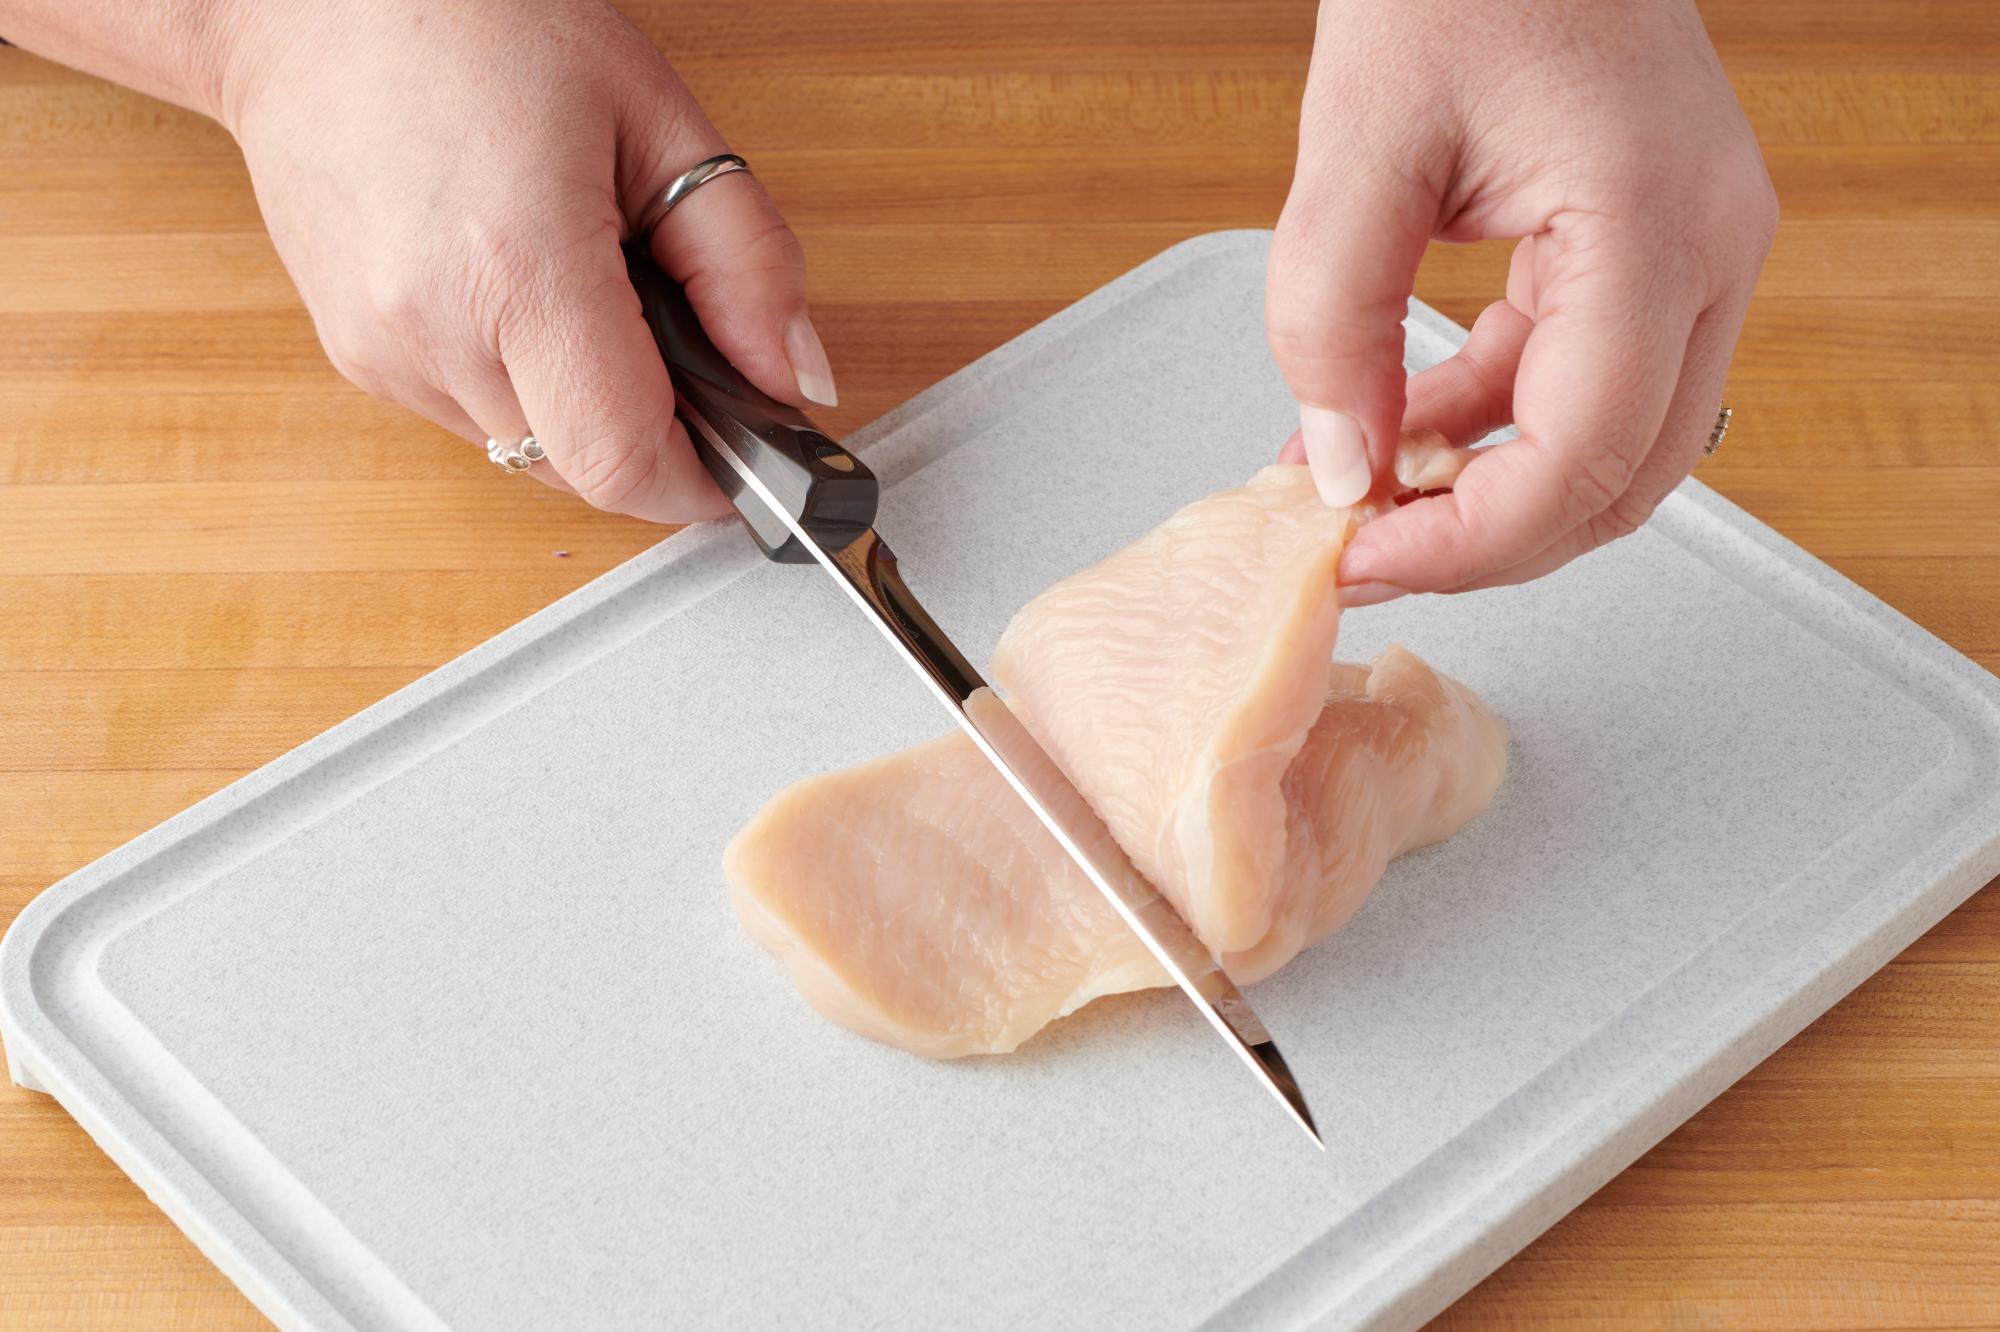 Using a Boning Knife to cut the breast in half.